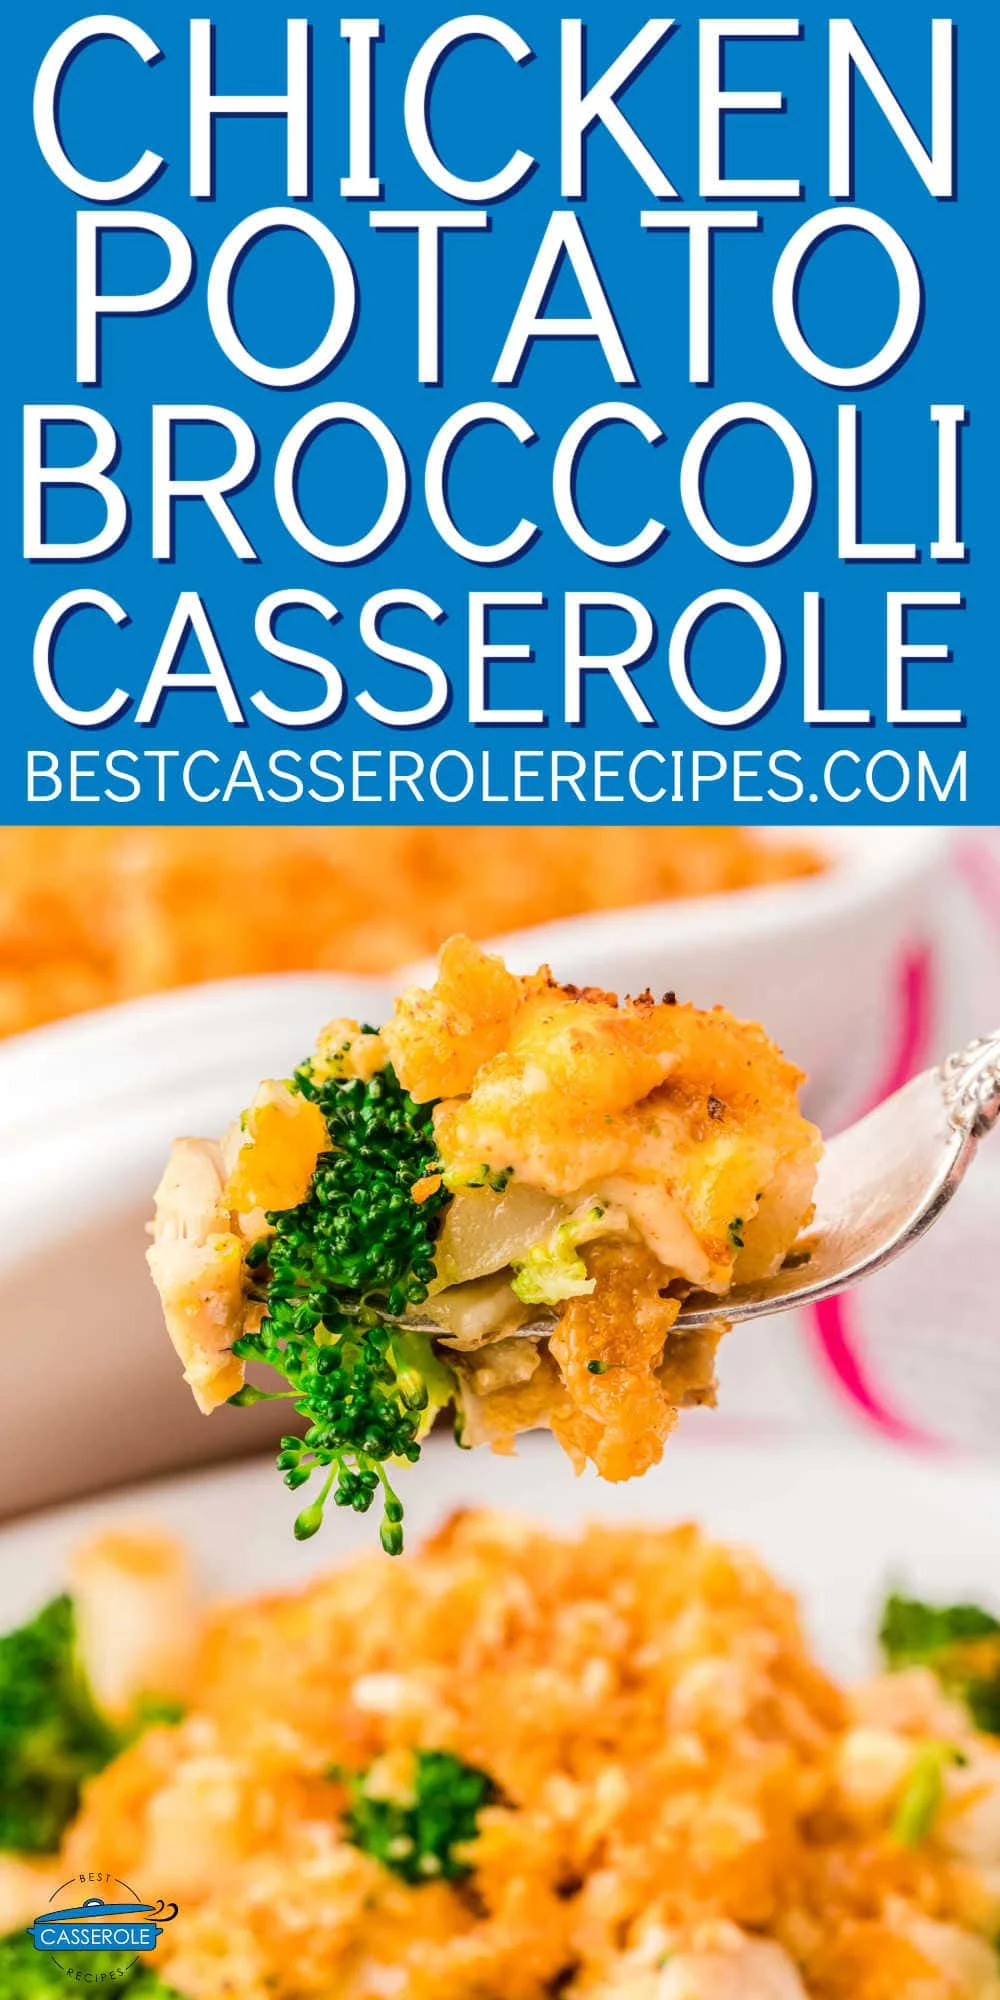 easy recipe of broccoli casserole with small pieces of chicken